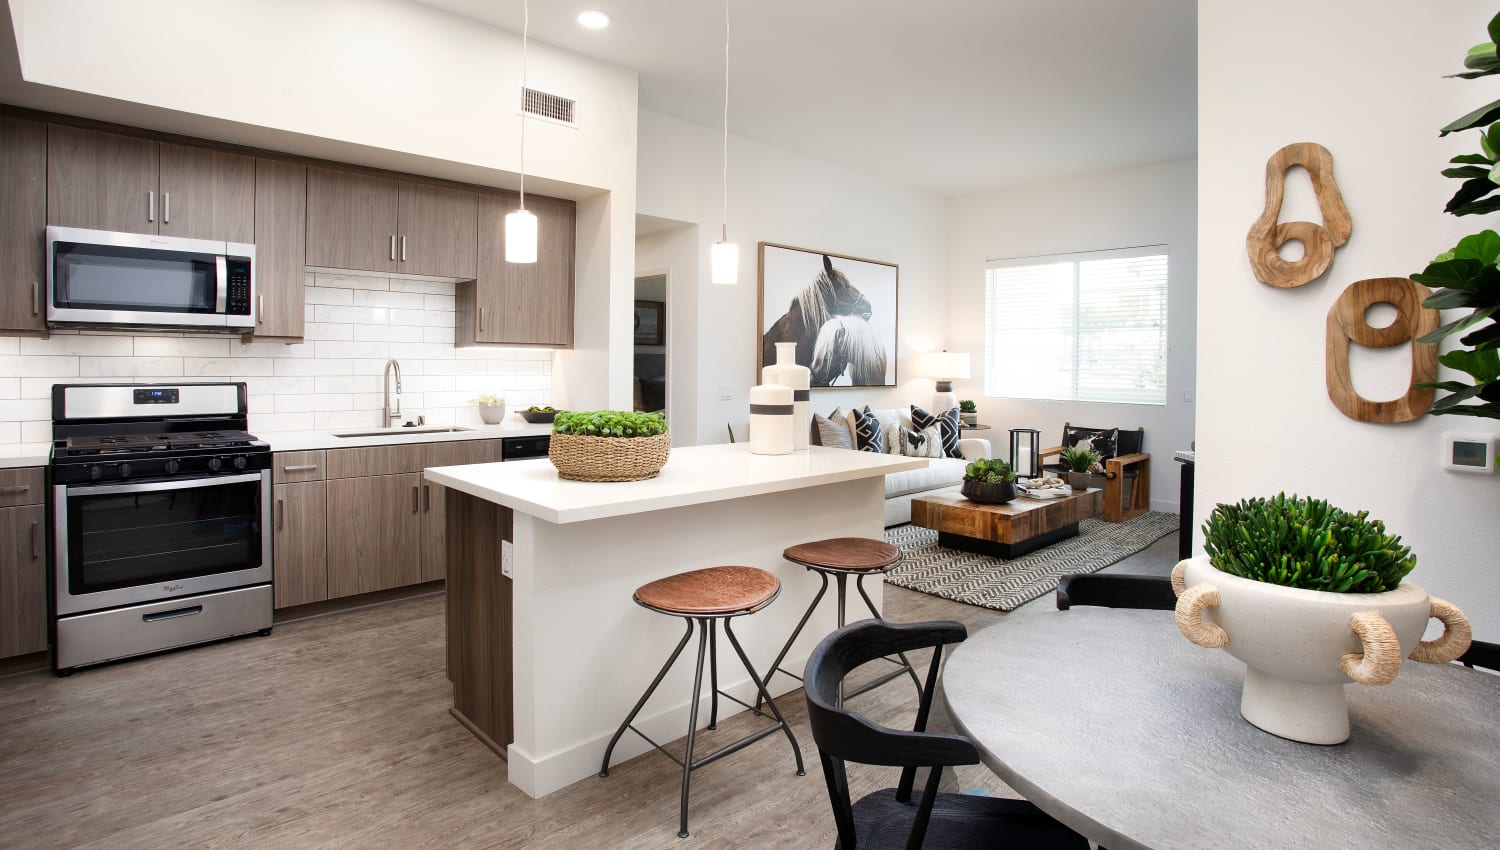 Modern kitchen space with bar seating at The Residences at Escaya in Chula Vista, California